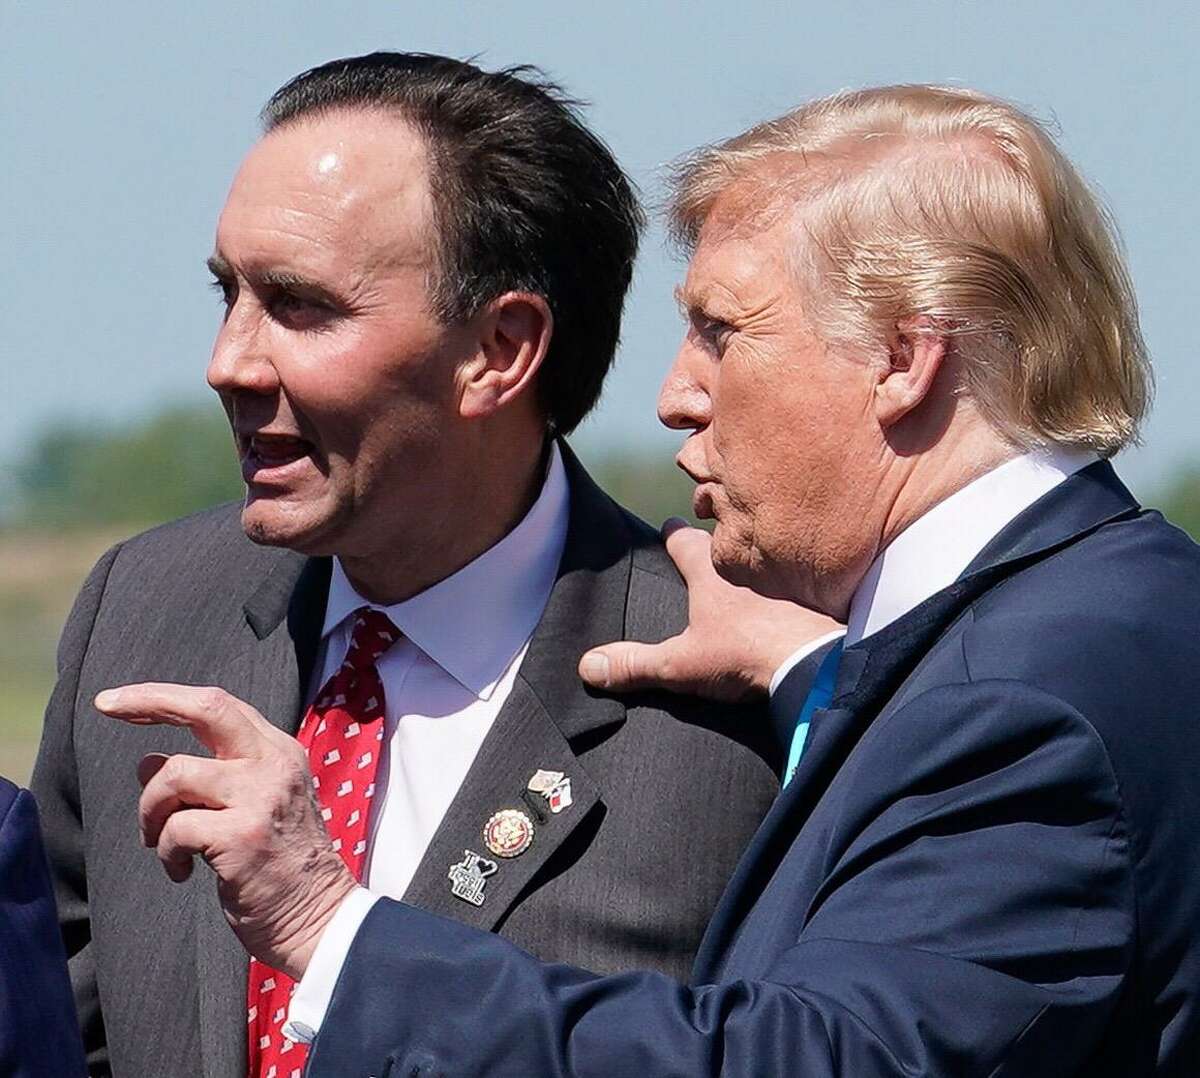 U.S. Rep. Pete Olson, R-Sugar Land, and President Donald Trump talk at Ellington Field, Wednesday, April 10, 2019 in Houston. Olson is not seeking re-election in Texas’ 22nd Congressional District.